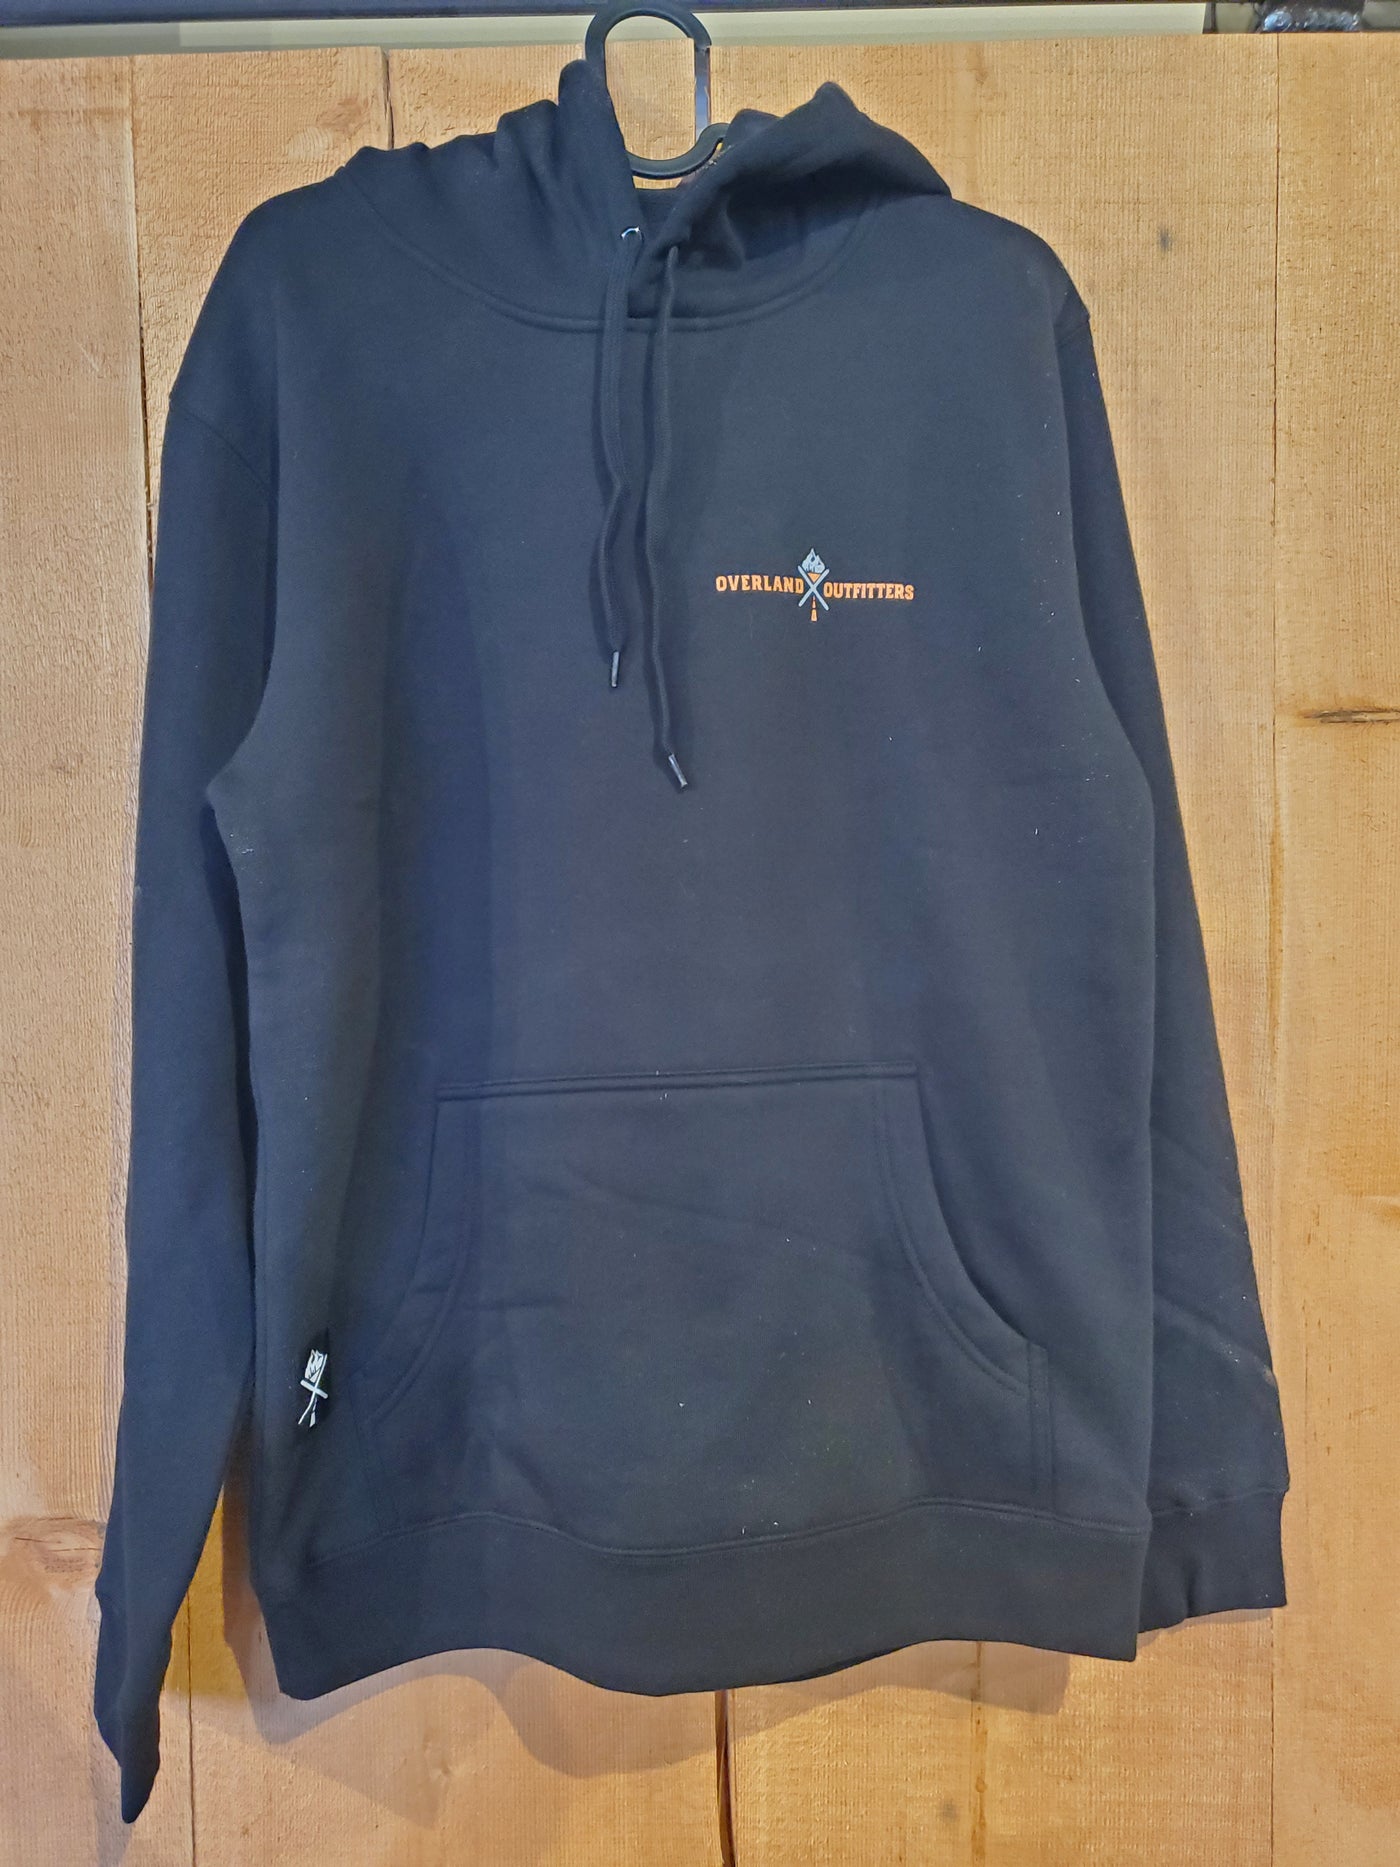 Overland Outfitters Built By Bloody Knuckles Hoodie